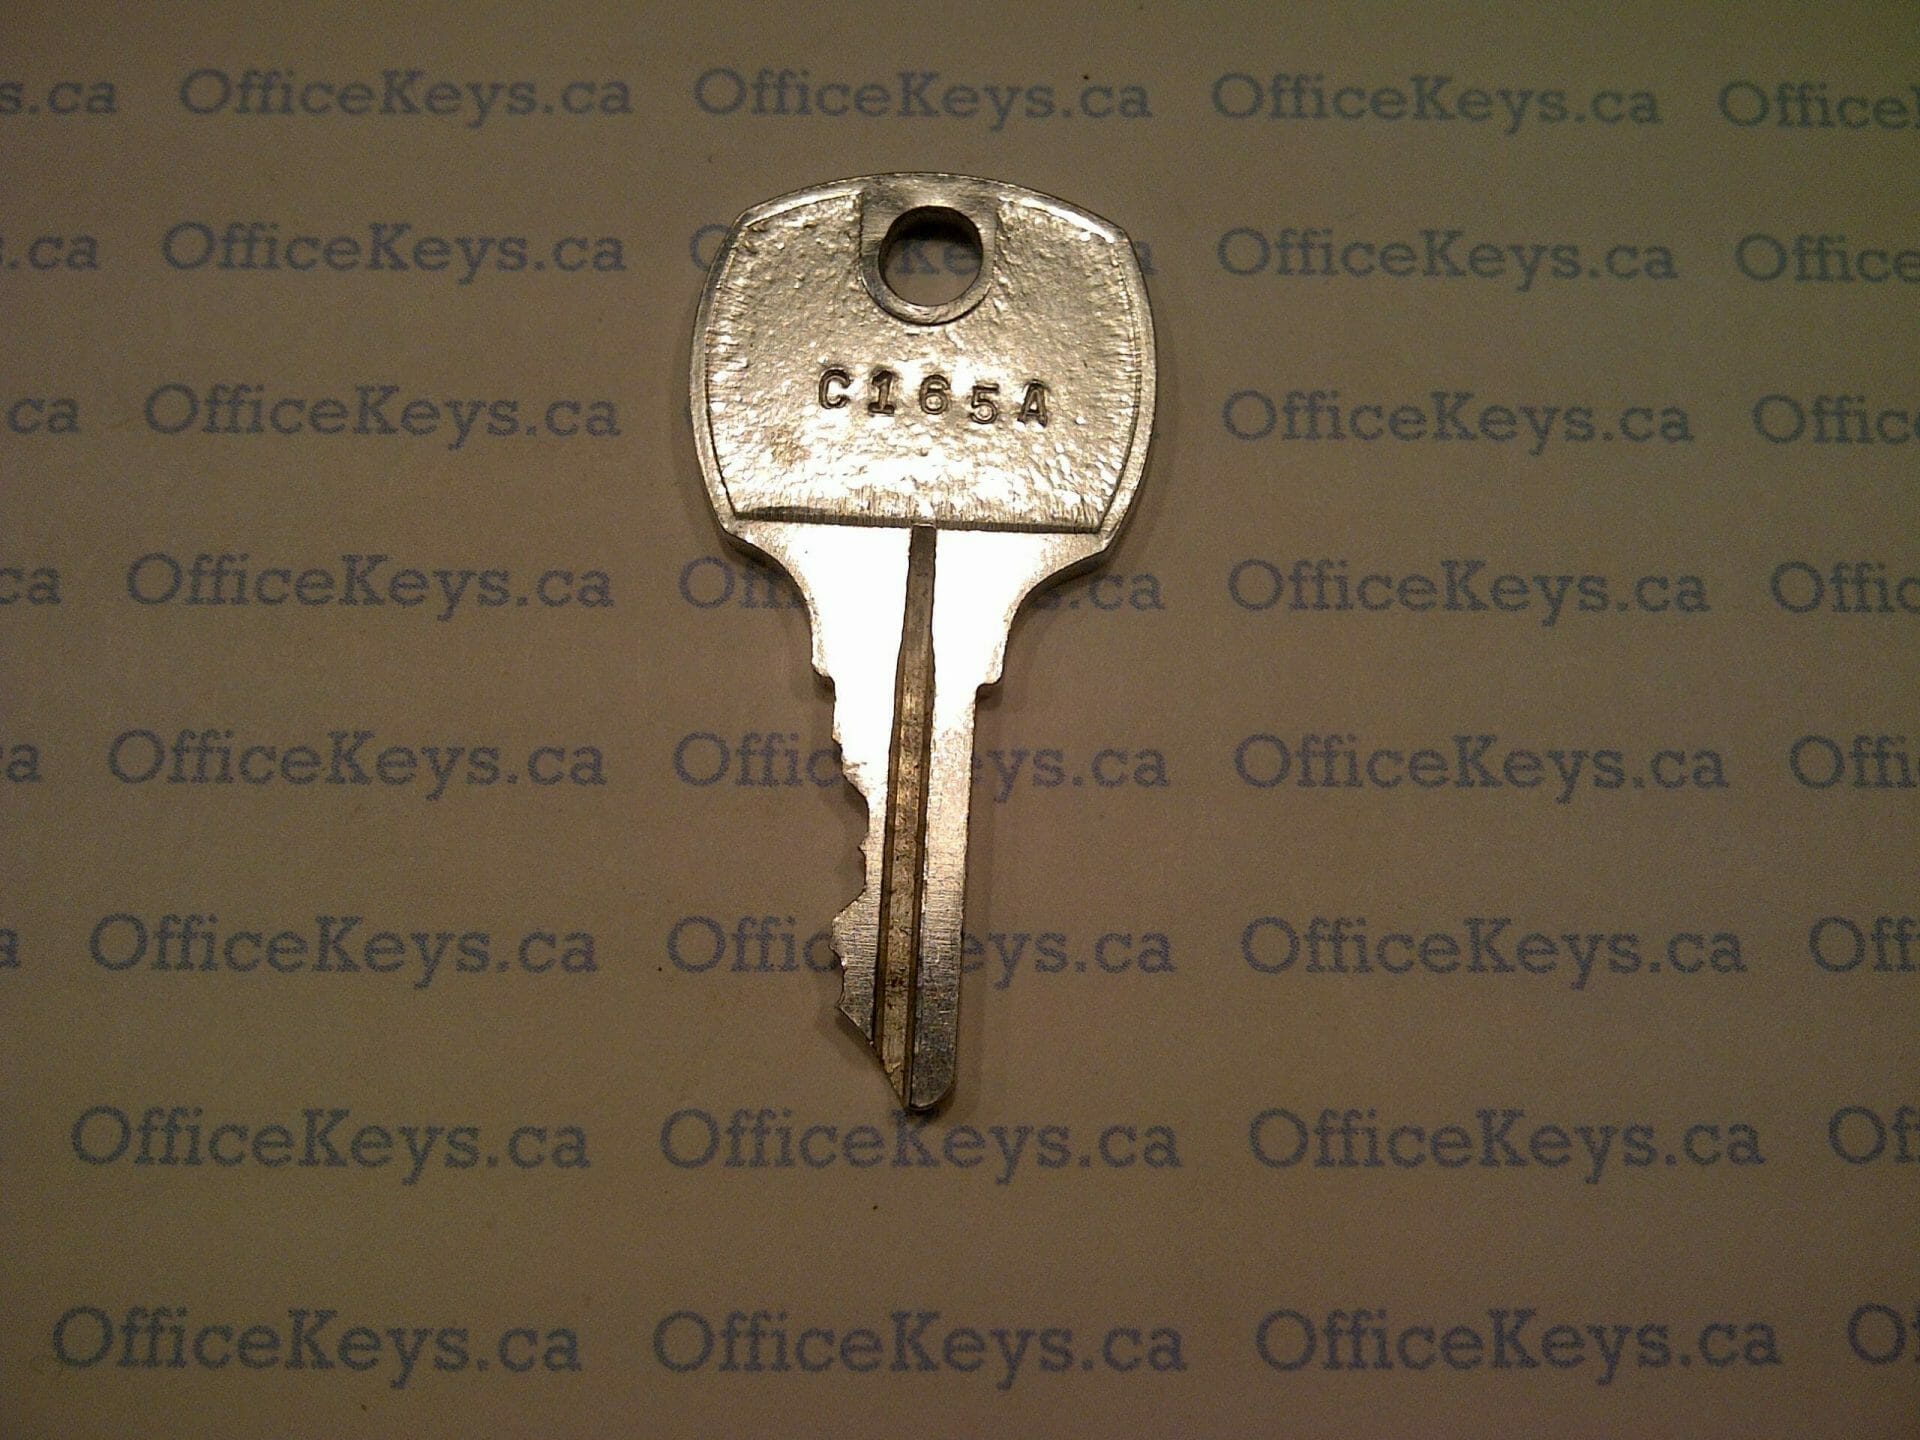 Buy 1 get 1 50% off Replacement Steelcase Furniture Key FR414